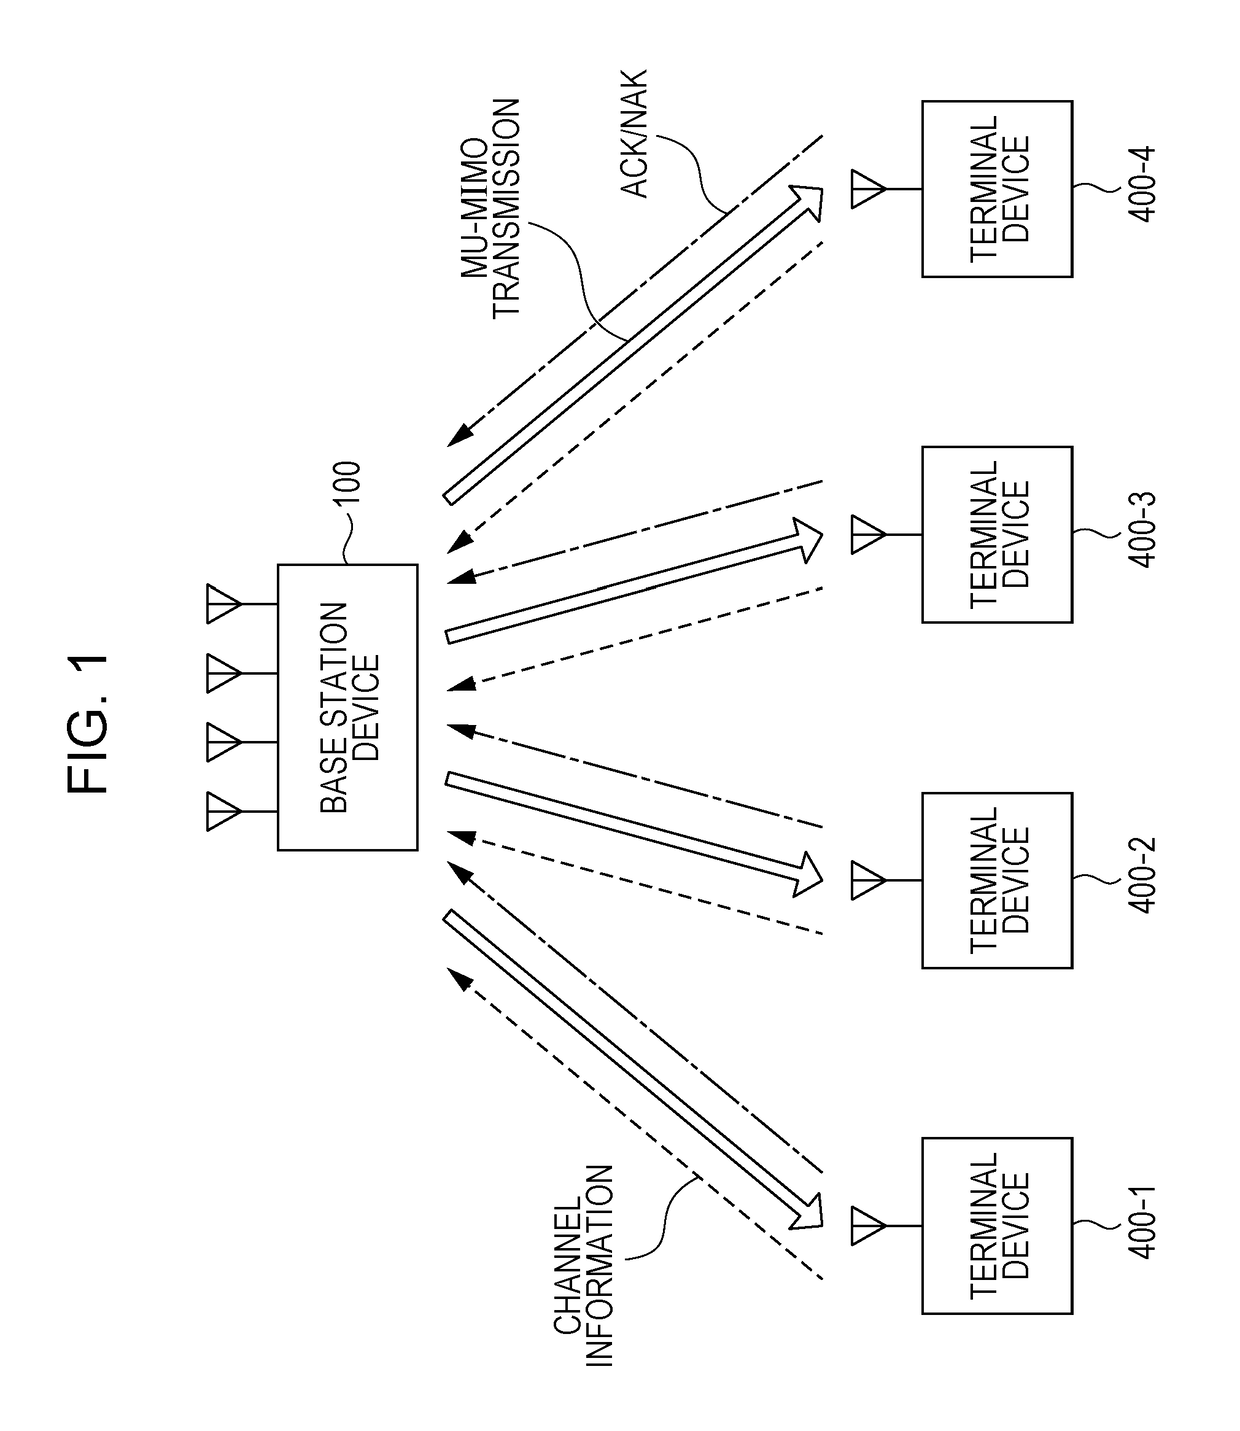 Transmission device that performs multi-user MIMO transmission for performing spatial multiplexing and transmitting of a plurality of packets addressed to a plurality of reception devices